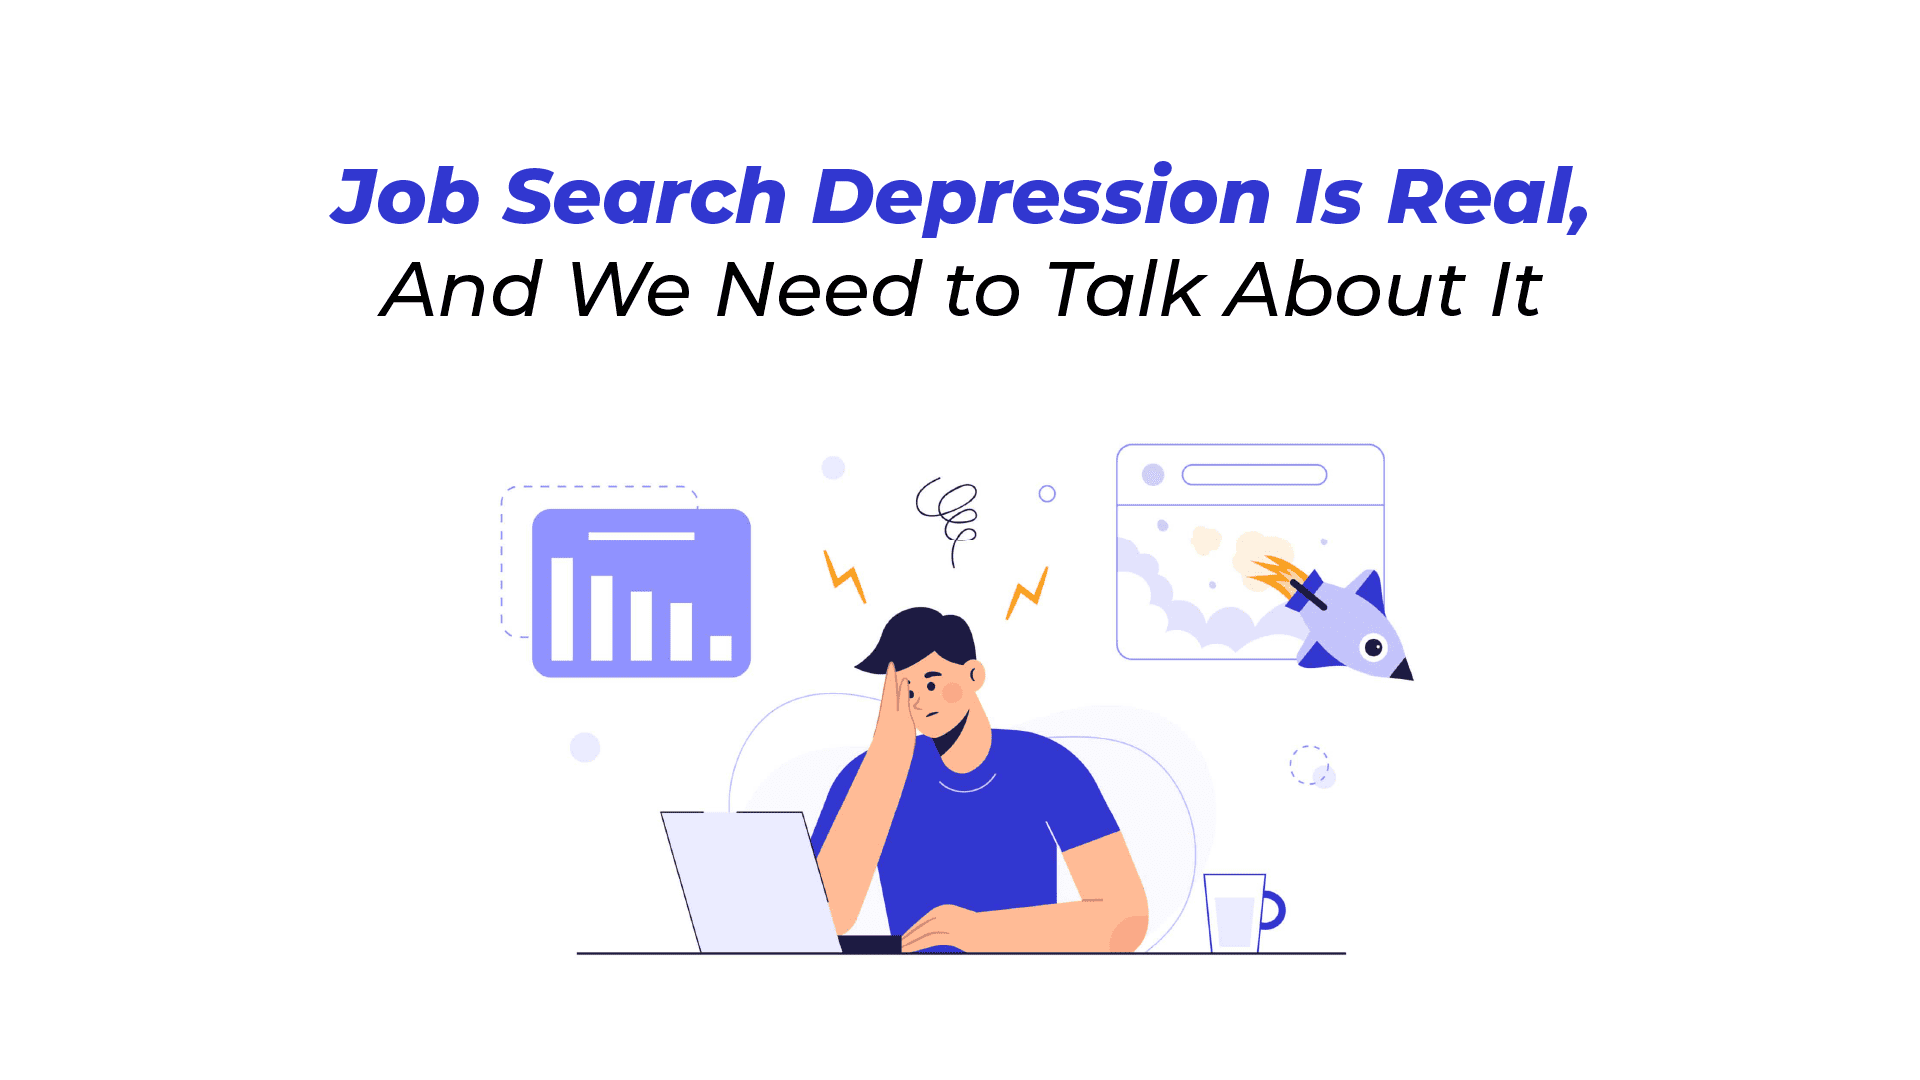 How to Deal With Job-Search Depression